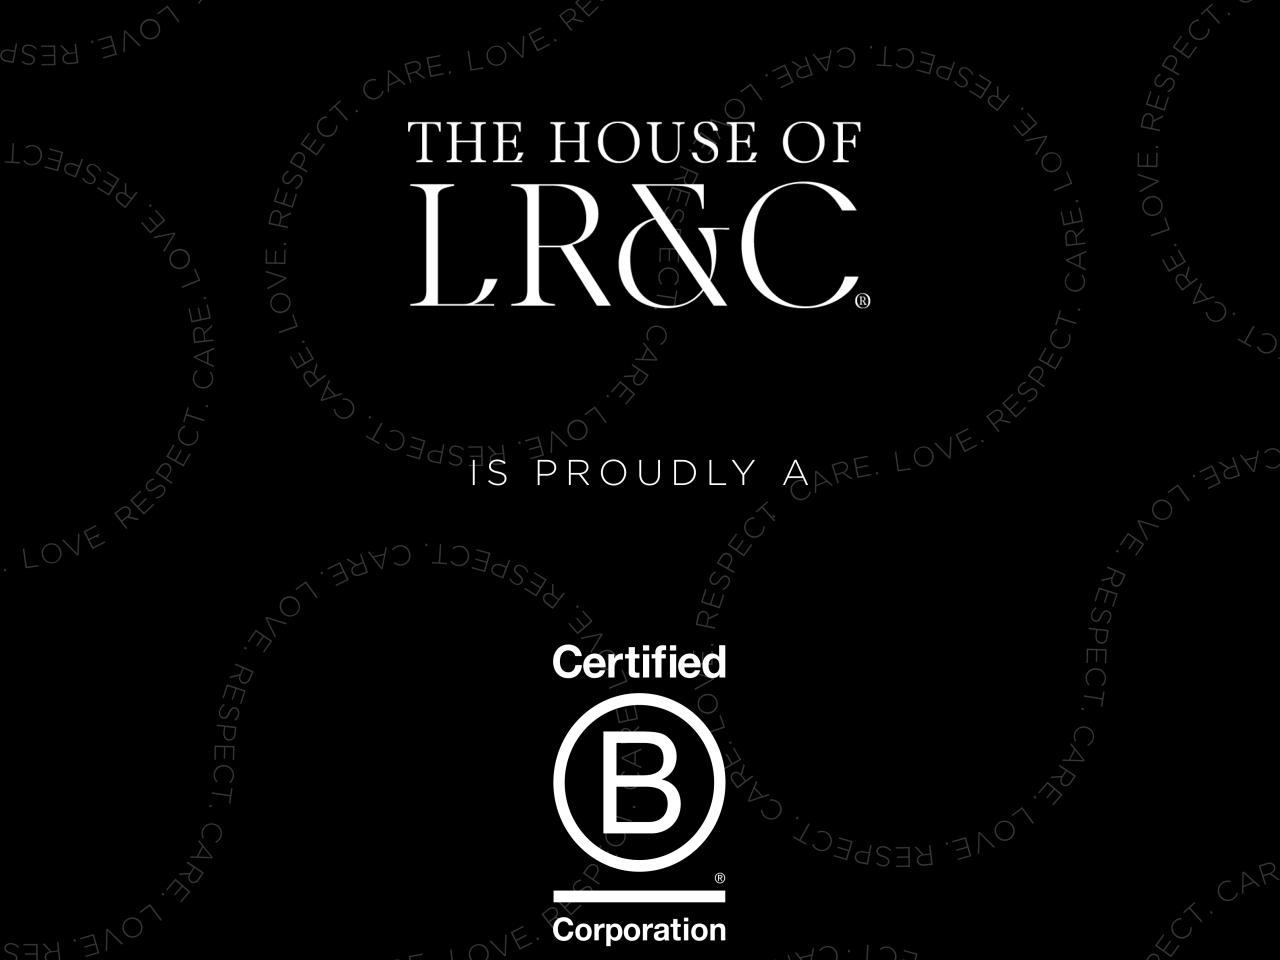 The House of LR&C Logo and Certified B Corp 